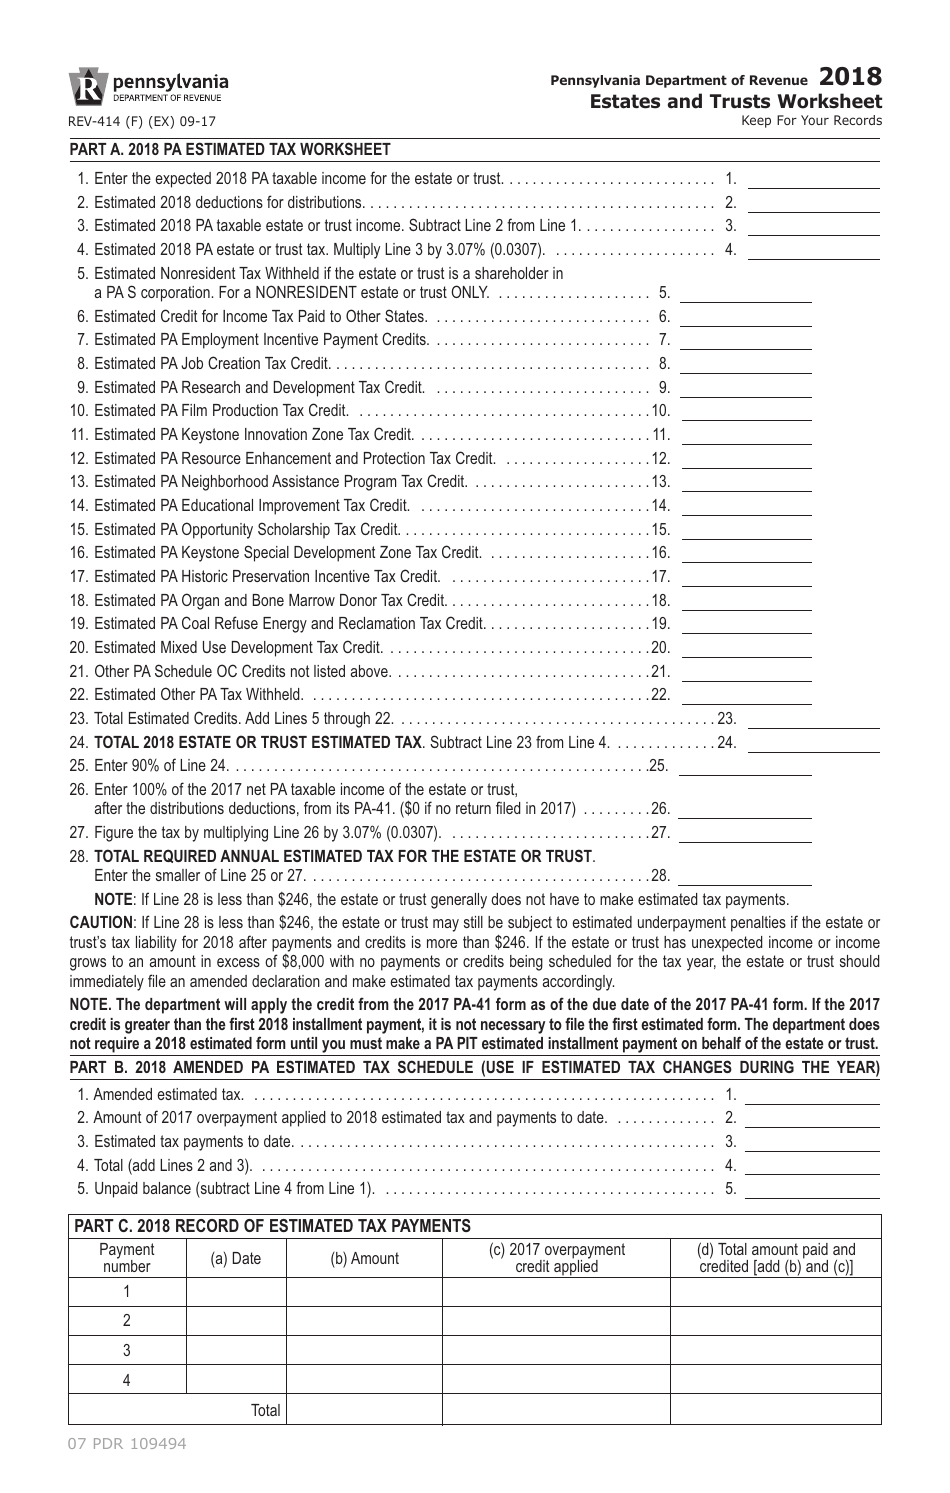 Form REV-414 (F) Estates and Trusts Worksheet - Pennsylvania, Page 1